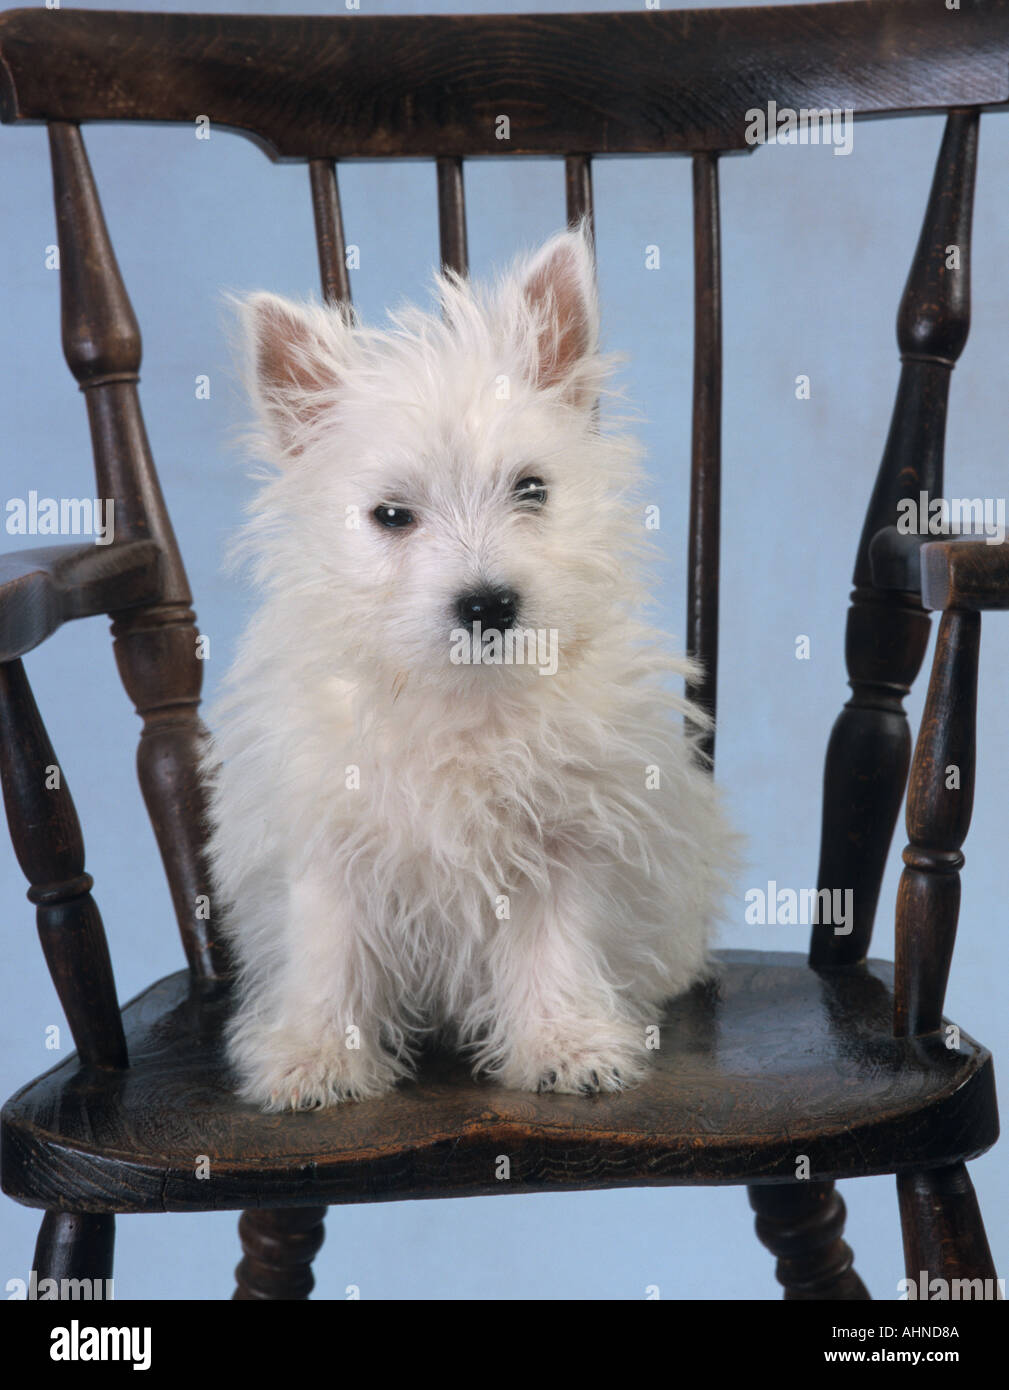 West Highland Terrier Puppy in cattedra Foto Stock